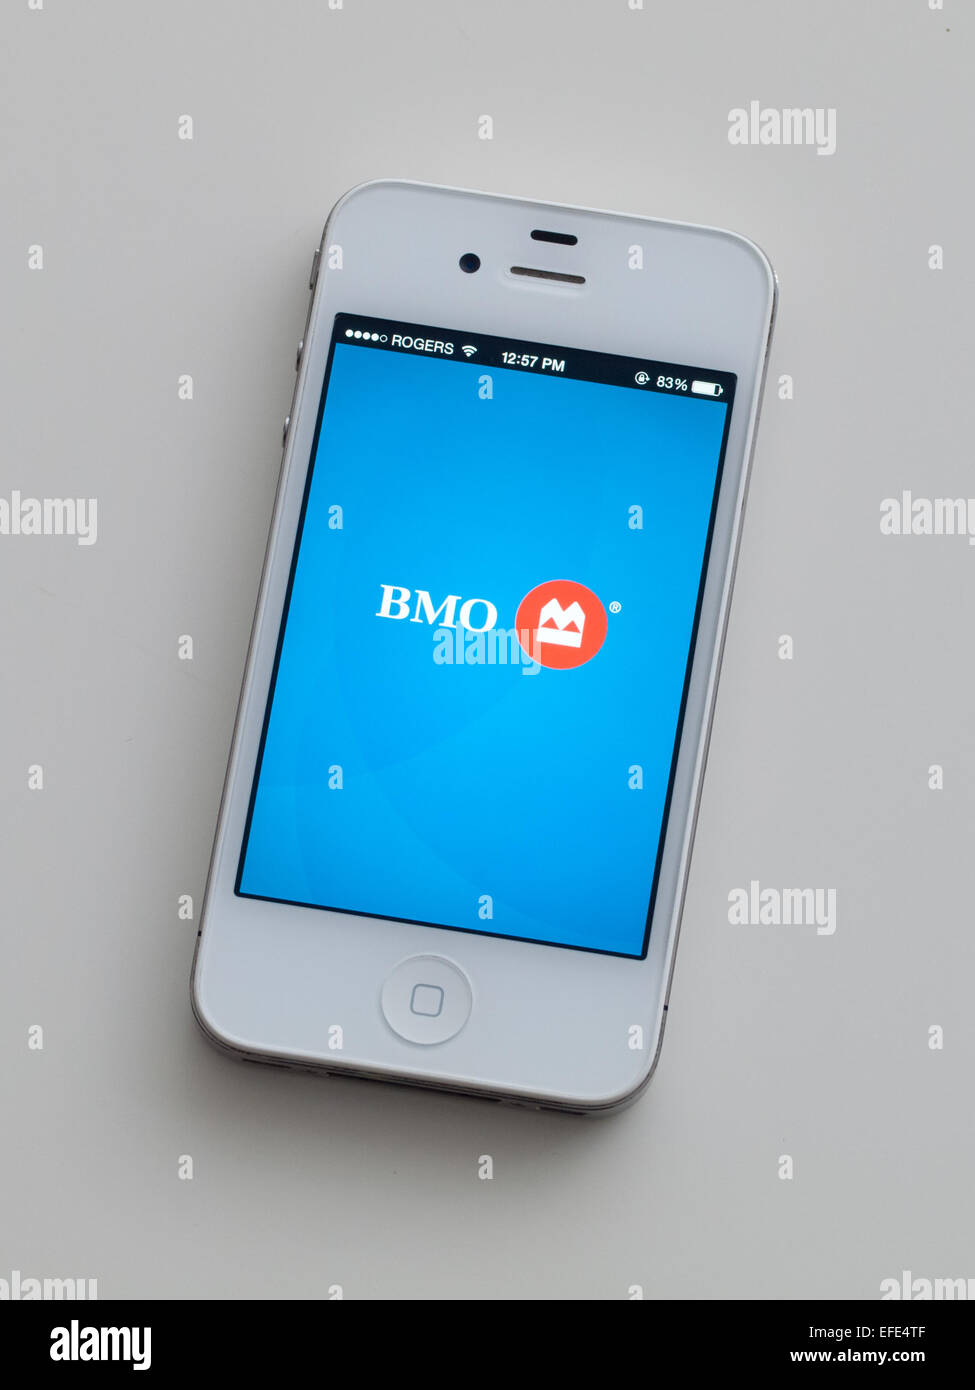 A view of the logo and homescreen of the Bank of Montreal (BMO) mobile app on an Apple iPhone 4. Stock Photo